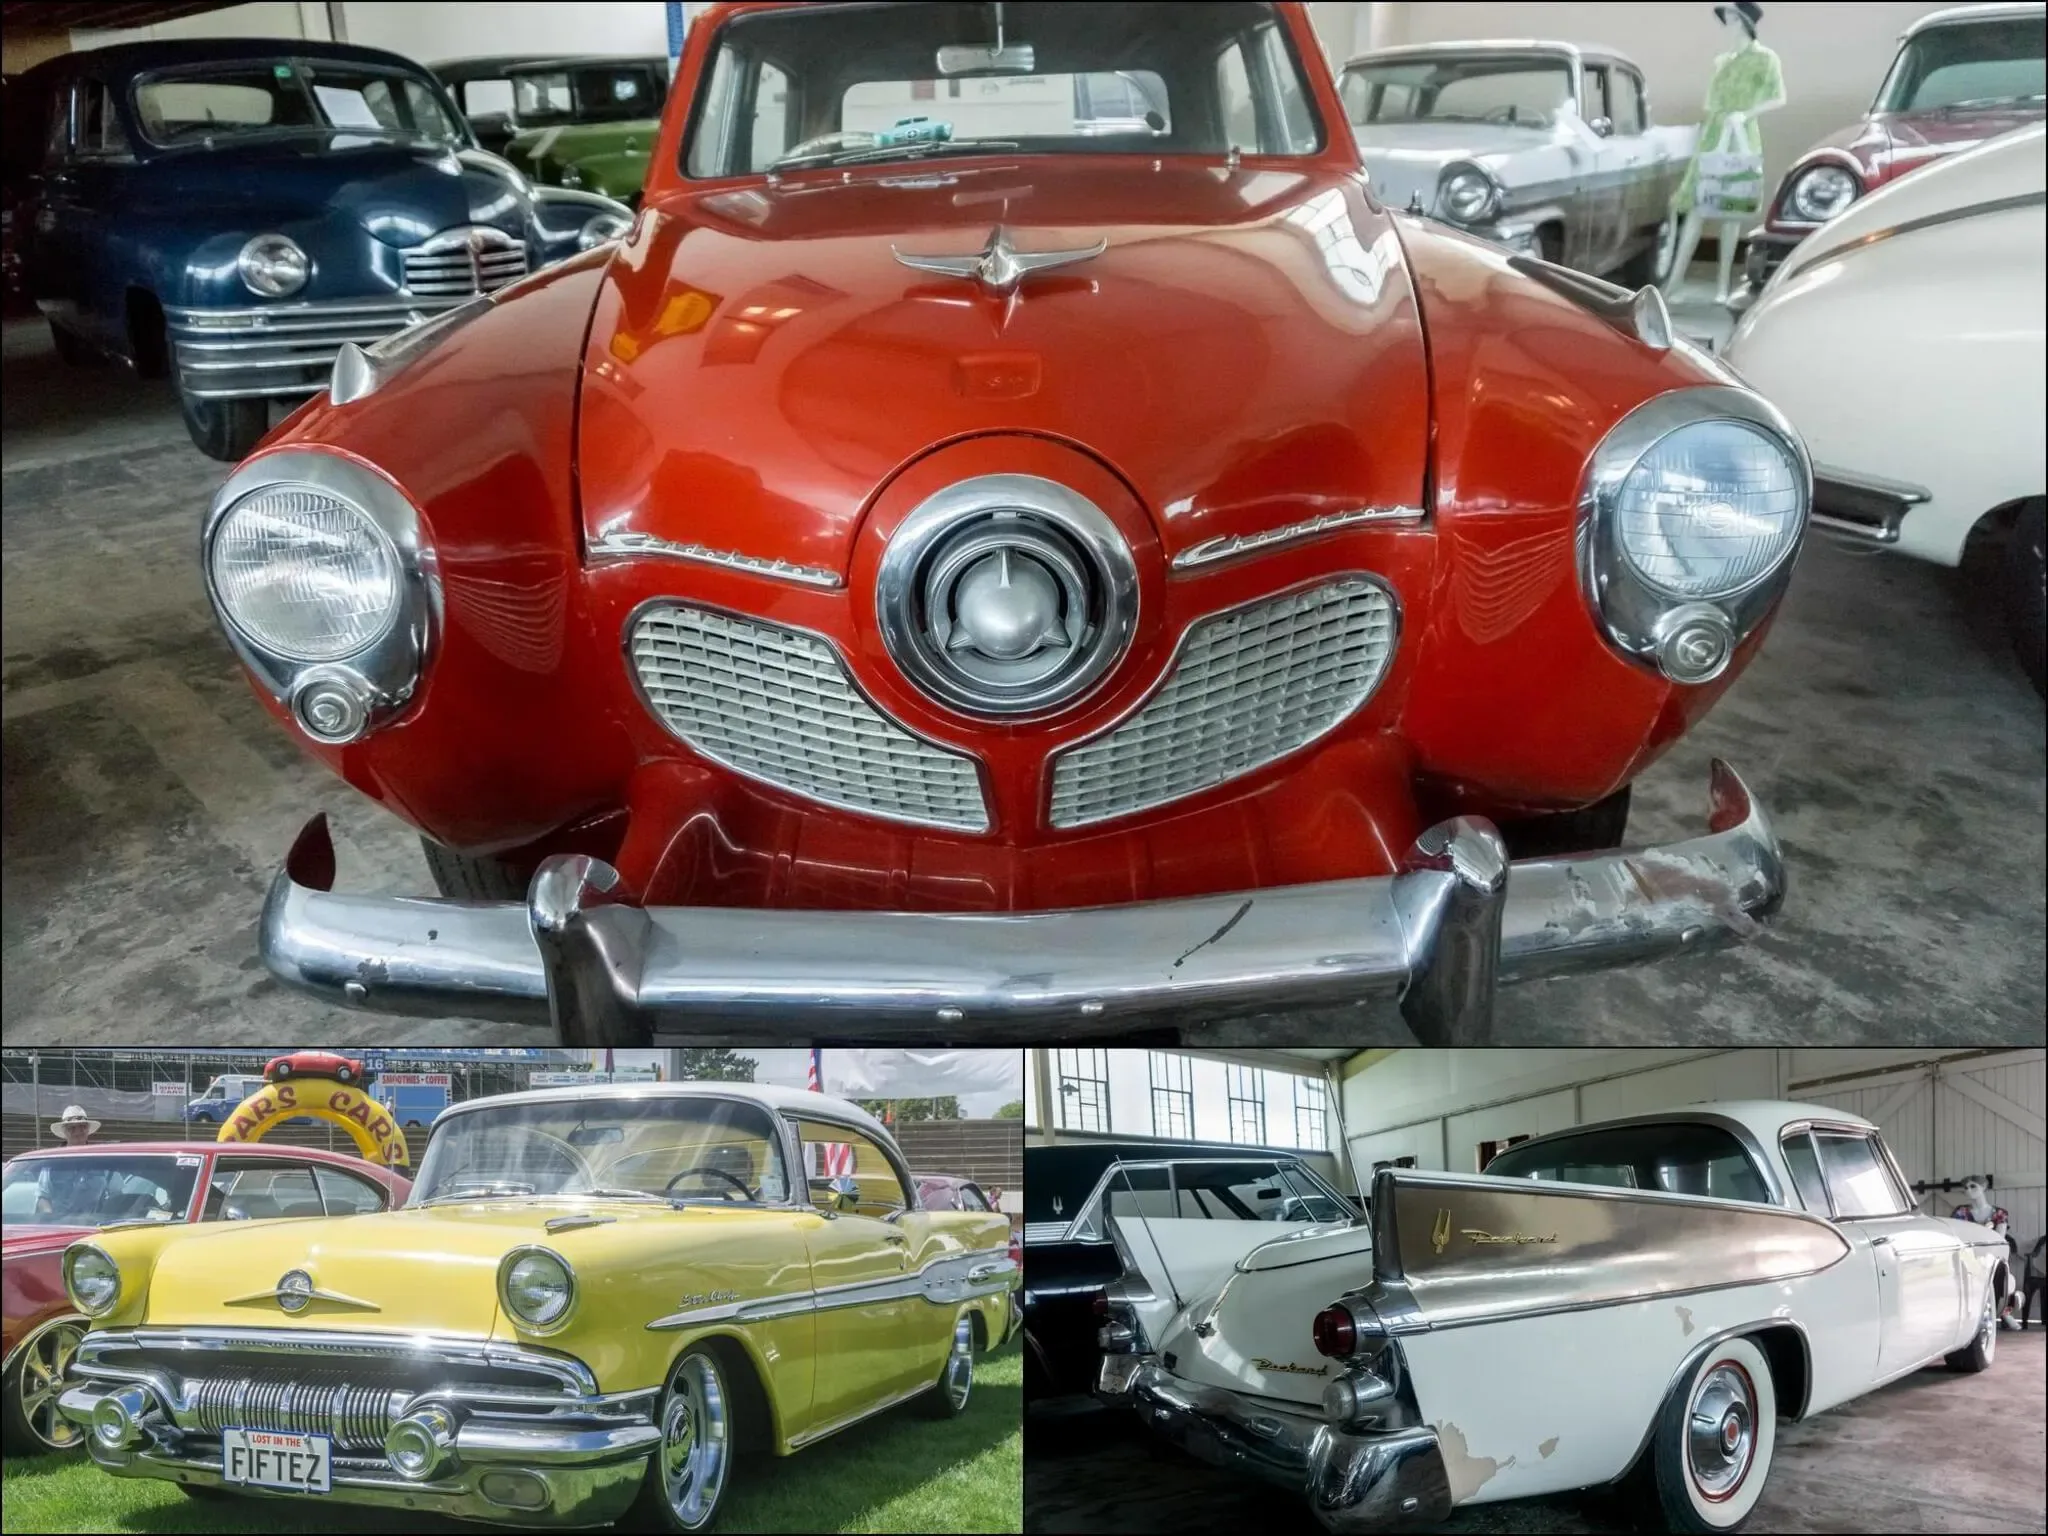 155 photos of 1950s American Cars